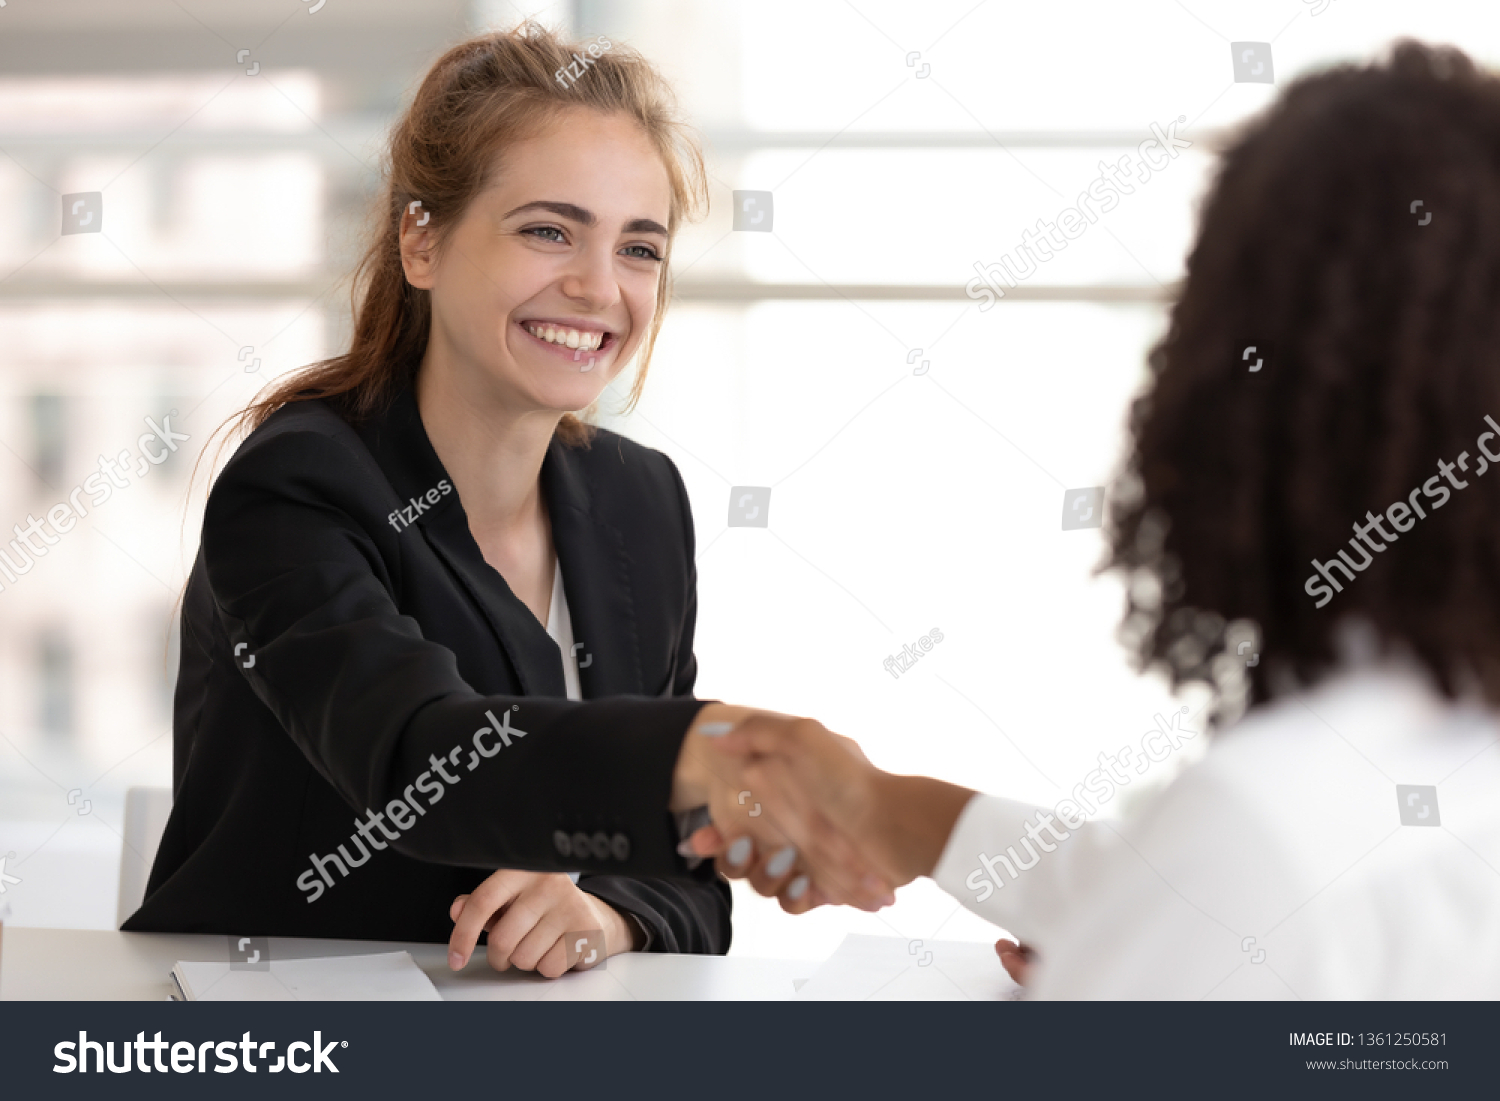 Happy businesswoman hr manager handshake hire candidate selling insurance services making good first impression, diverse broker and client customer shake hand at business office meeting job interview #1361250581